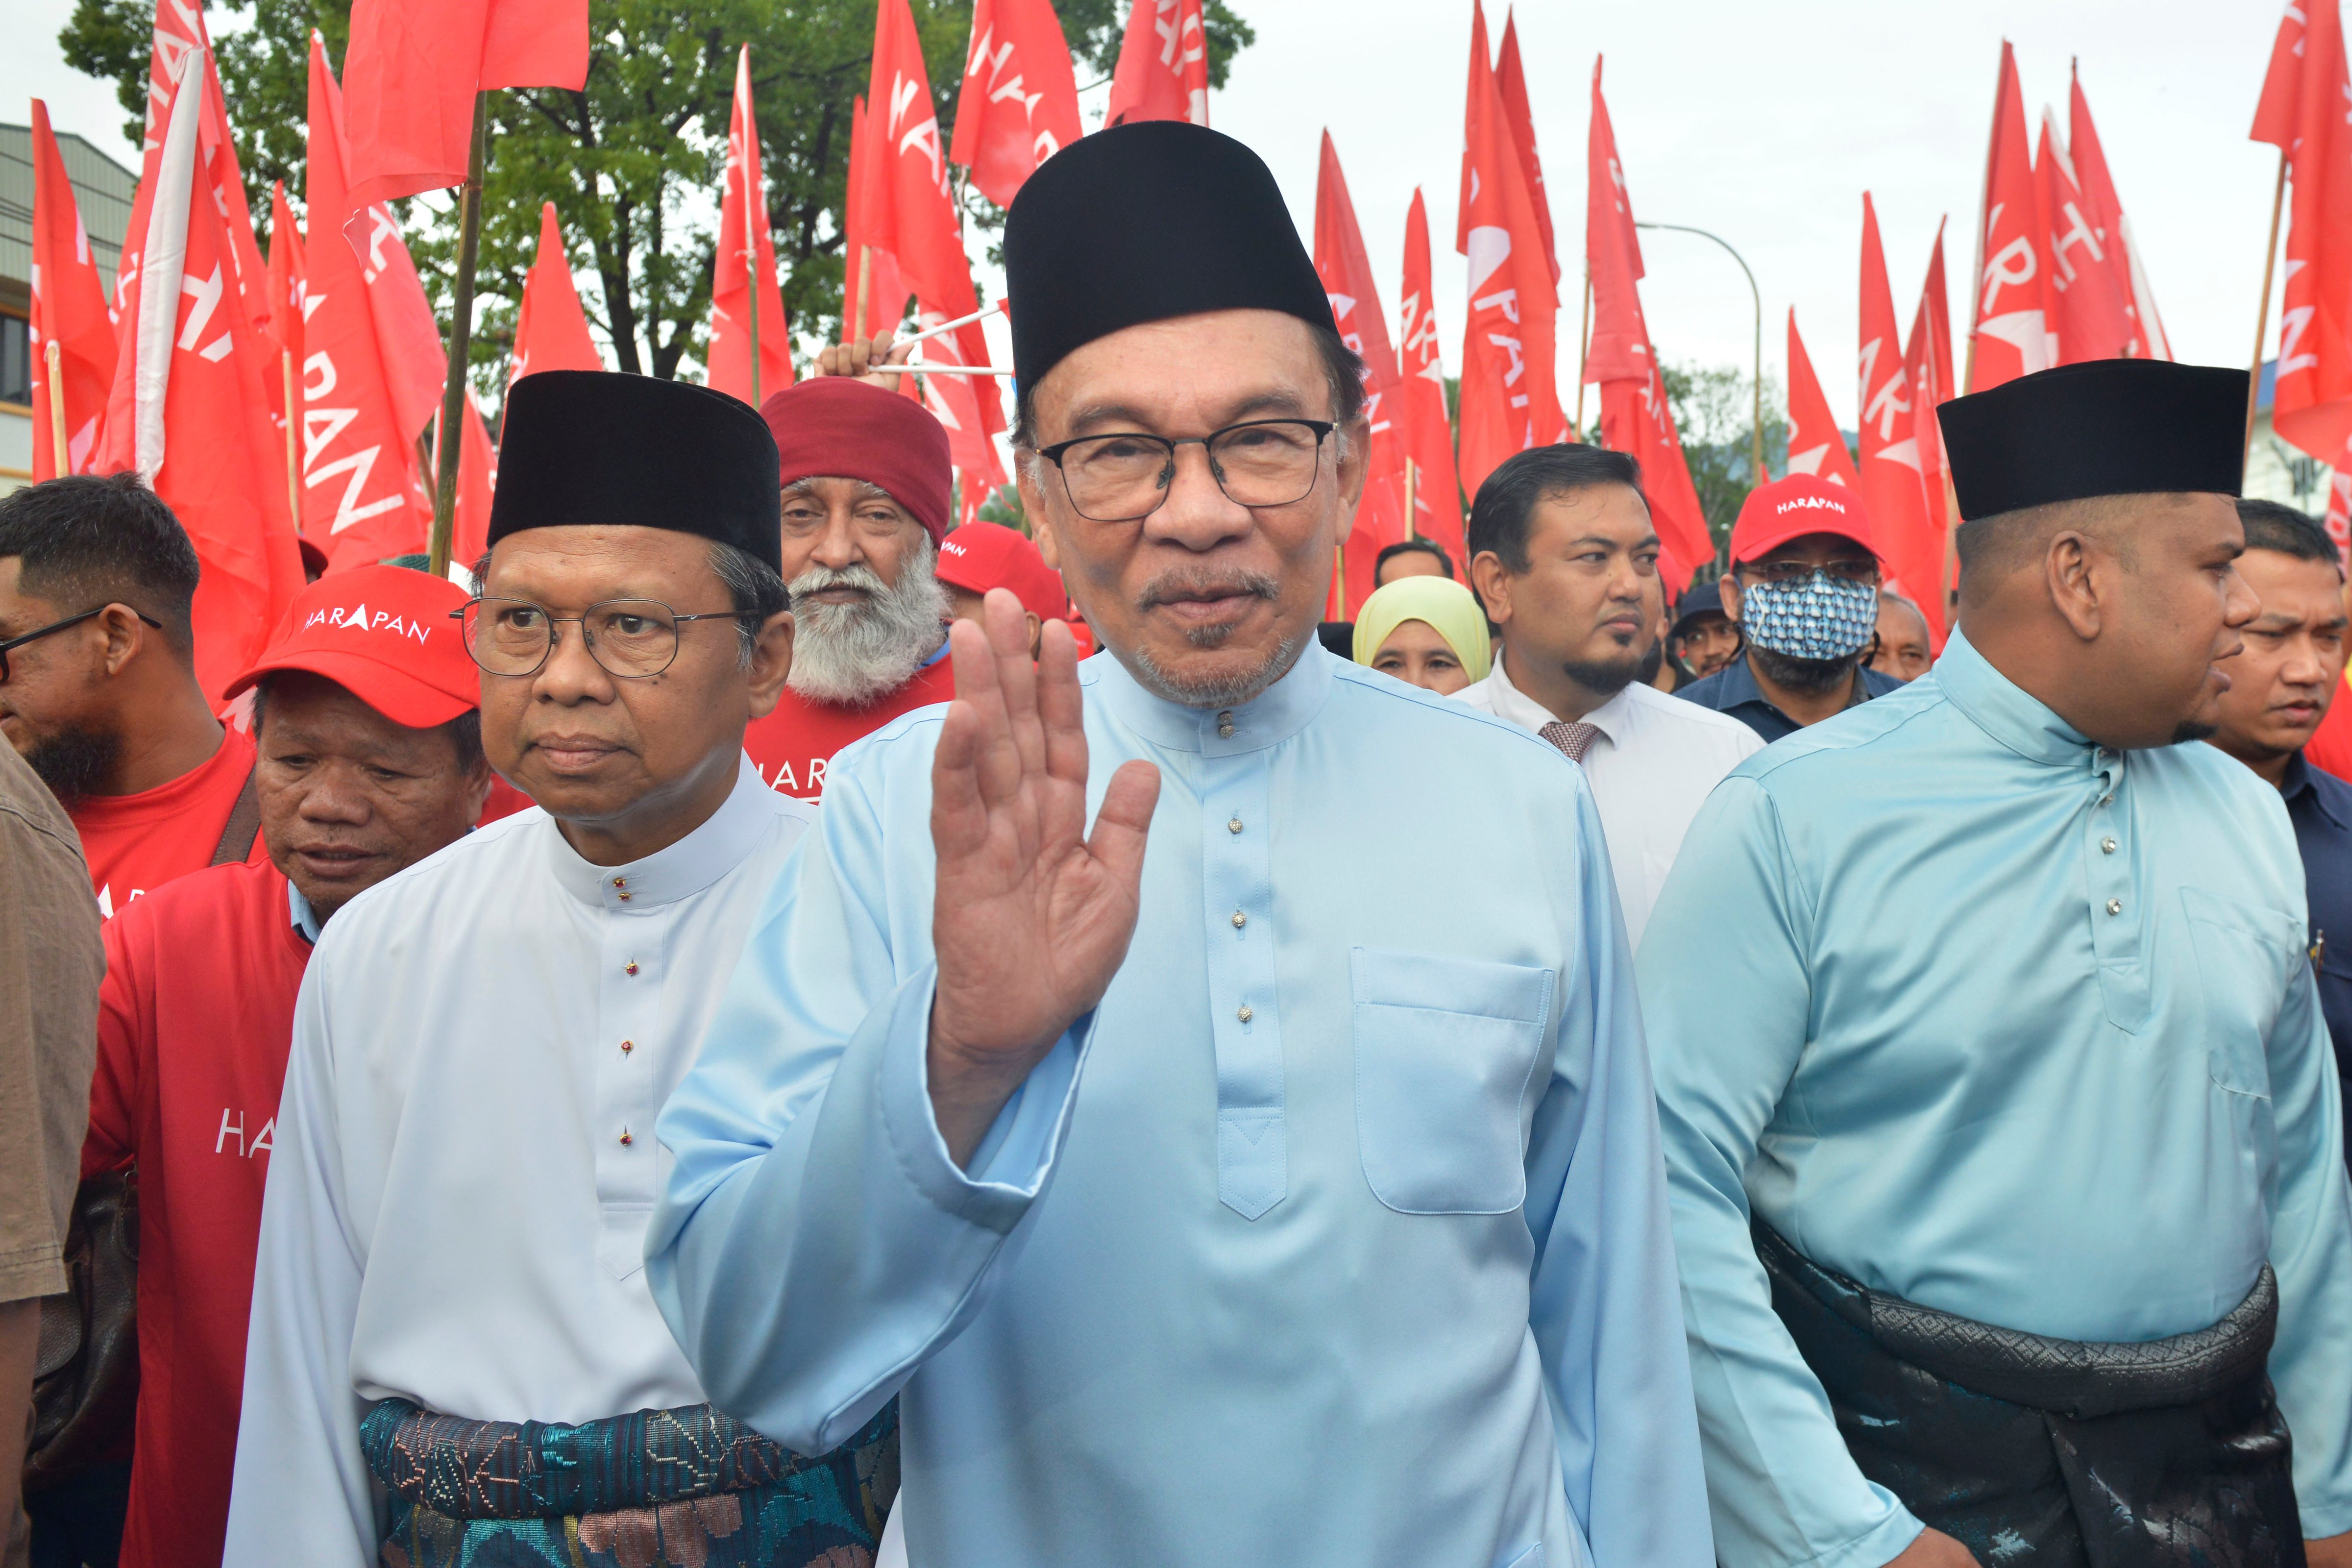 Malaysian opposition leader Anwar Ibrahim waves to his supporters as he arrives at a nomination center for the upcoming general election in Tambun, Malaysia, Saturday, Nov. 5, 2022. Malaysia's king on Thursday, Nov. 24, 2022, named Anwar as the country's prime minister, ending days of uncertainties after divisive general elections produced a hung Parliament. (John Shen Lee–AP)